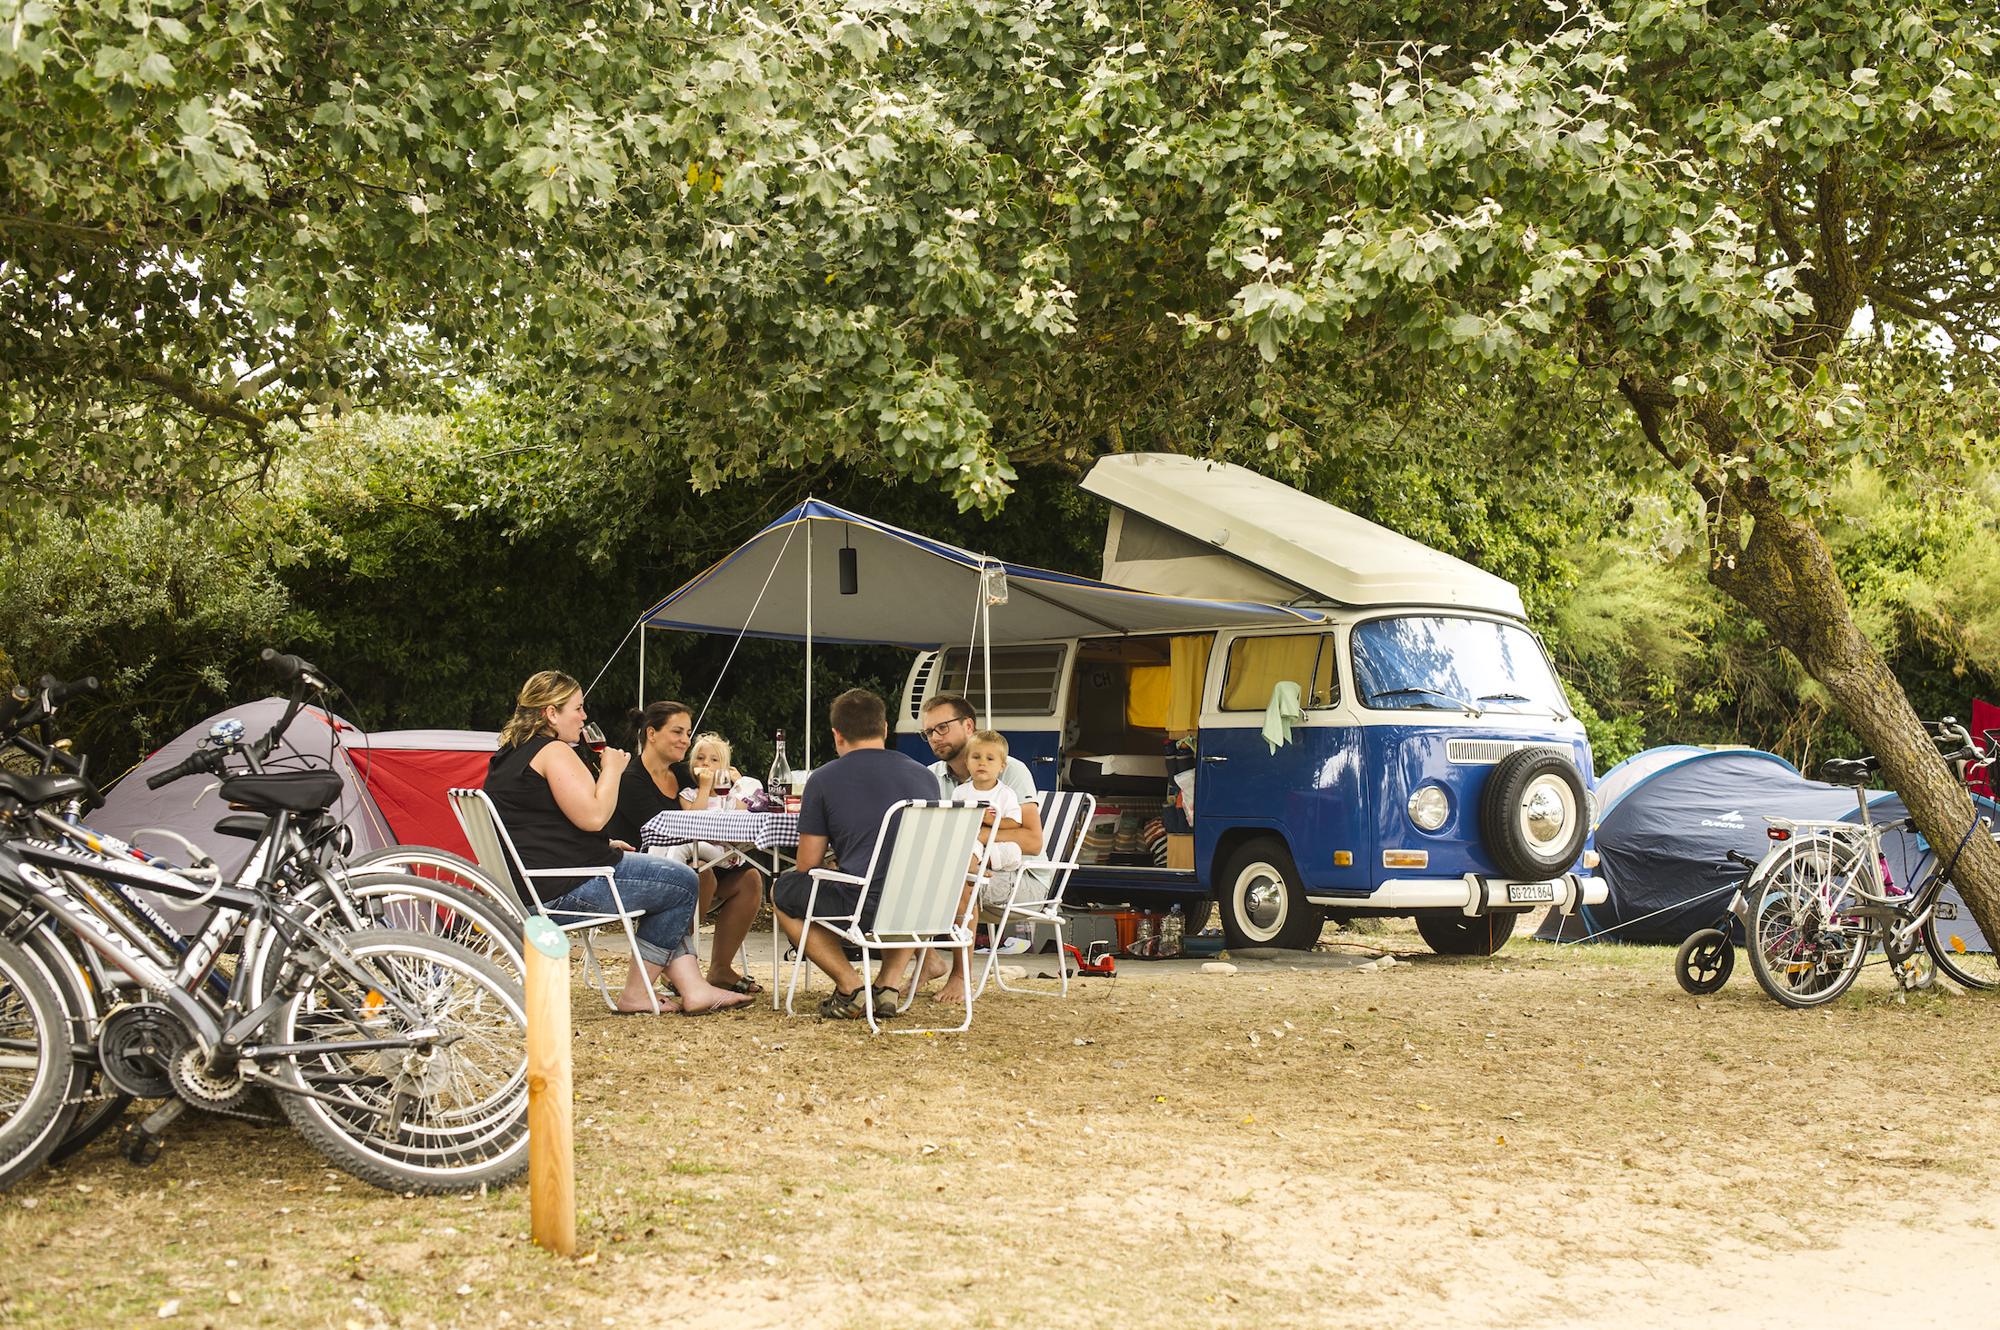 Campervan Hire in Europe | Motorhome Rental in France, Spain, Italy, Portugal and more.